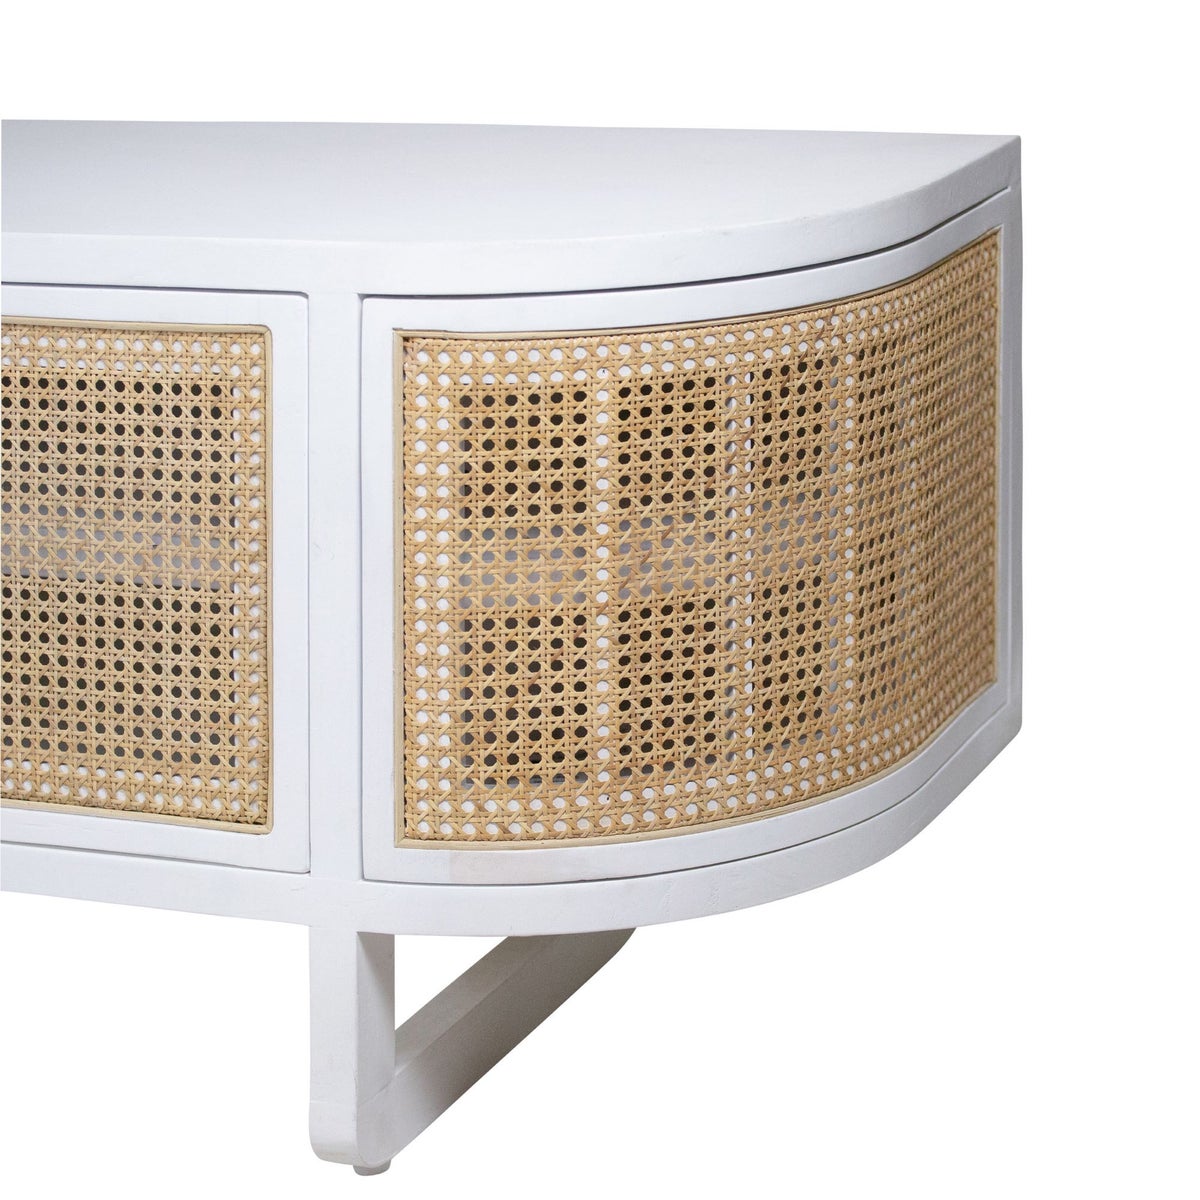 Stockholm Media Console in White